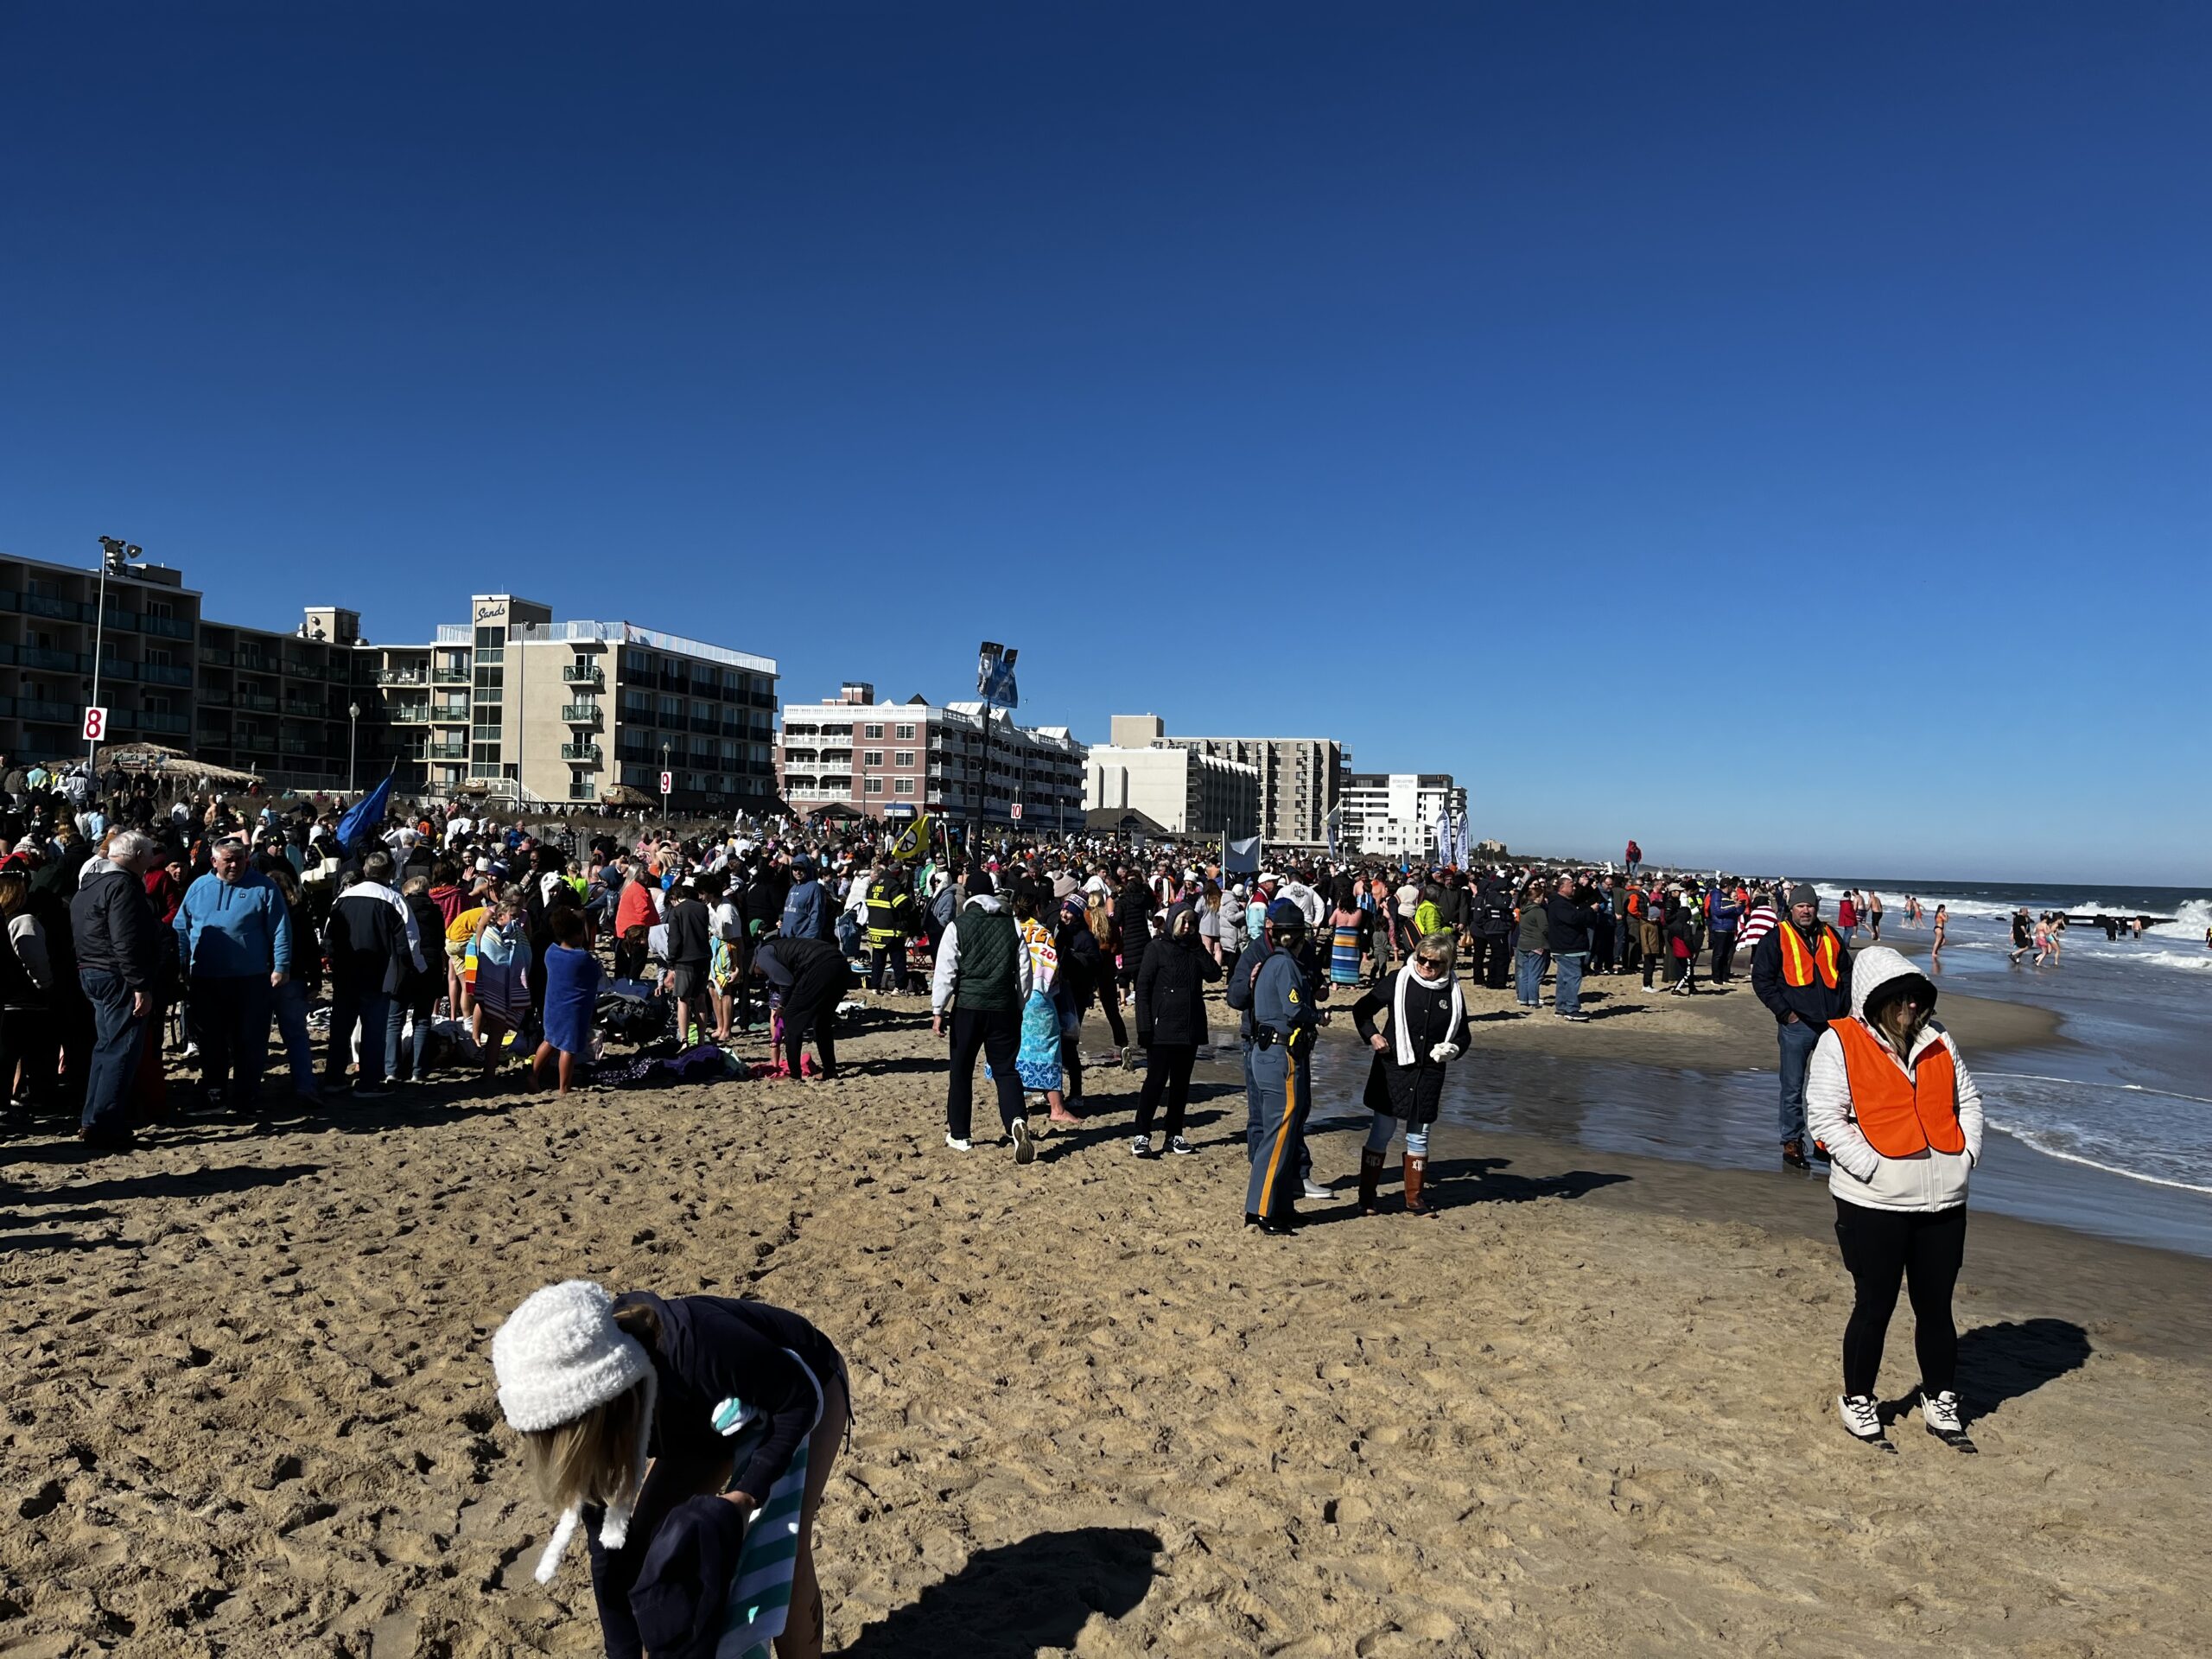 Featured image for “Polar Bear Plunge raises $1.5 million for Special Olympics Delaware”